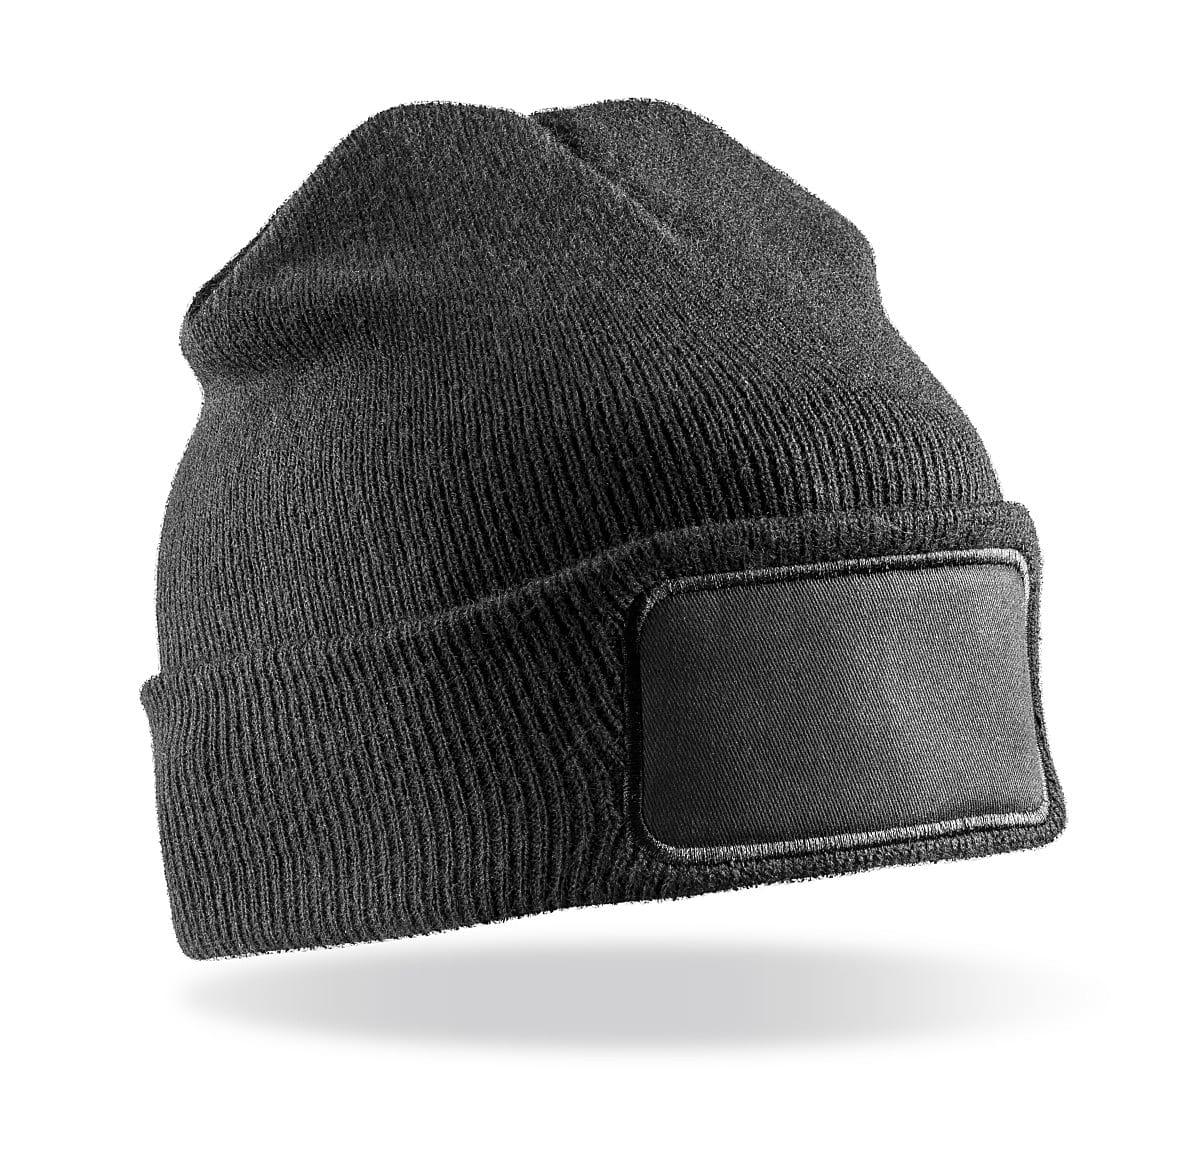 Result Winter Thinsulate Printers Beanie Hat in Black (Product Code: RC034X)